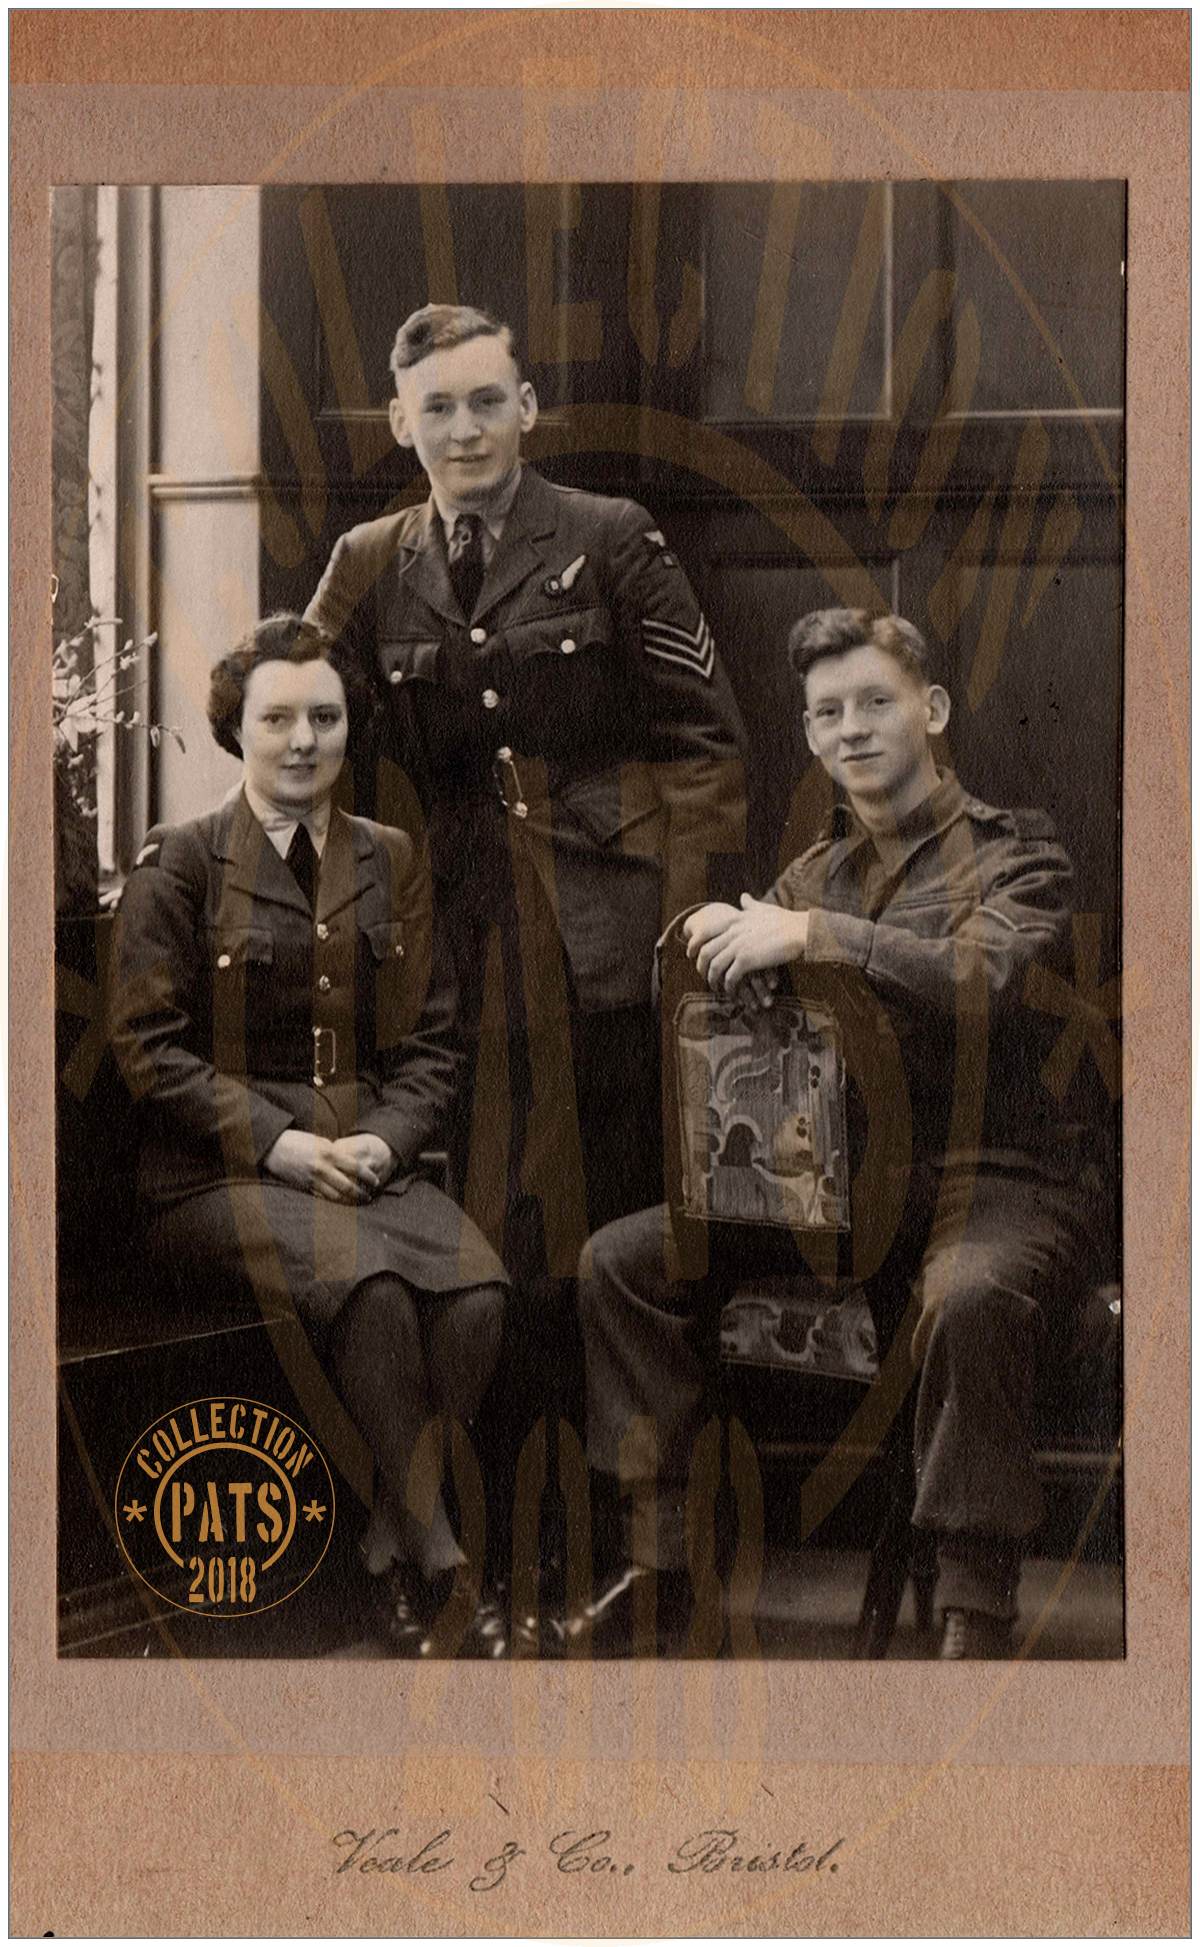 Joan (~24), Jack (~19) and George Manley (~16) - 1943